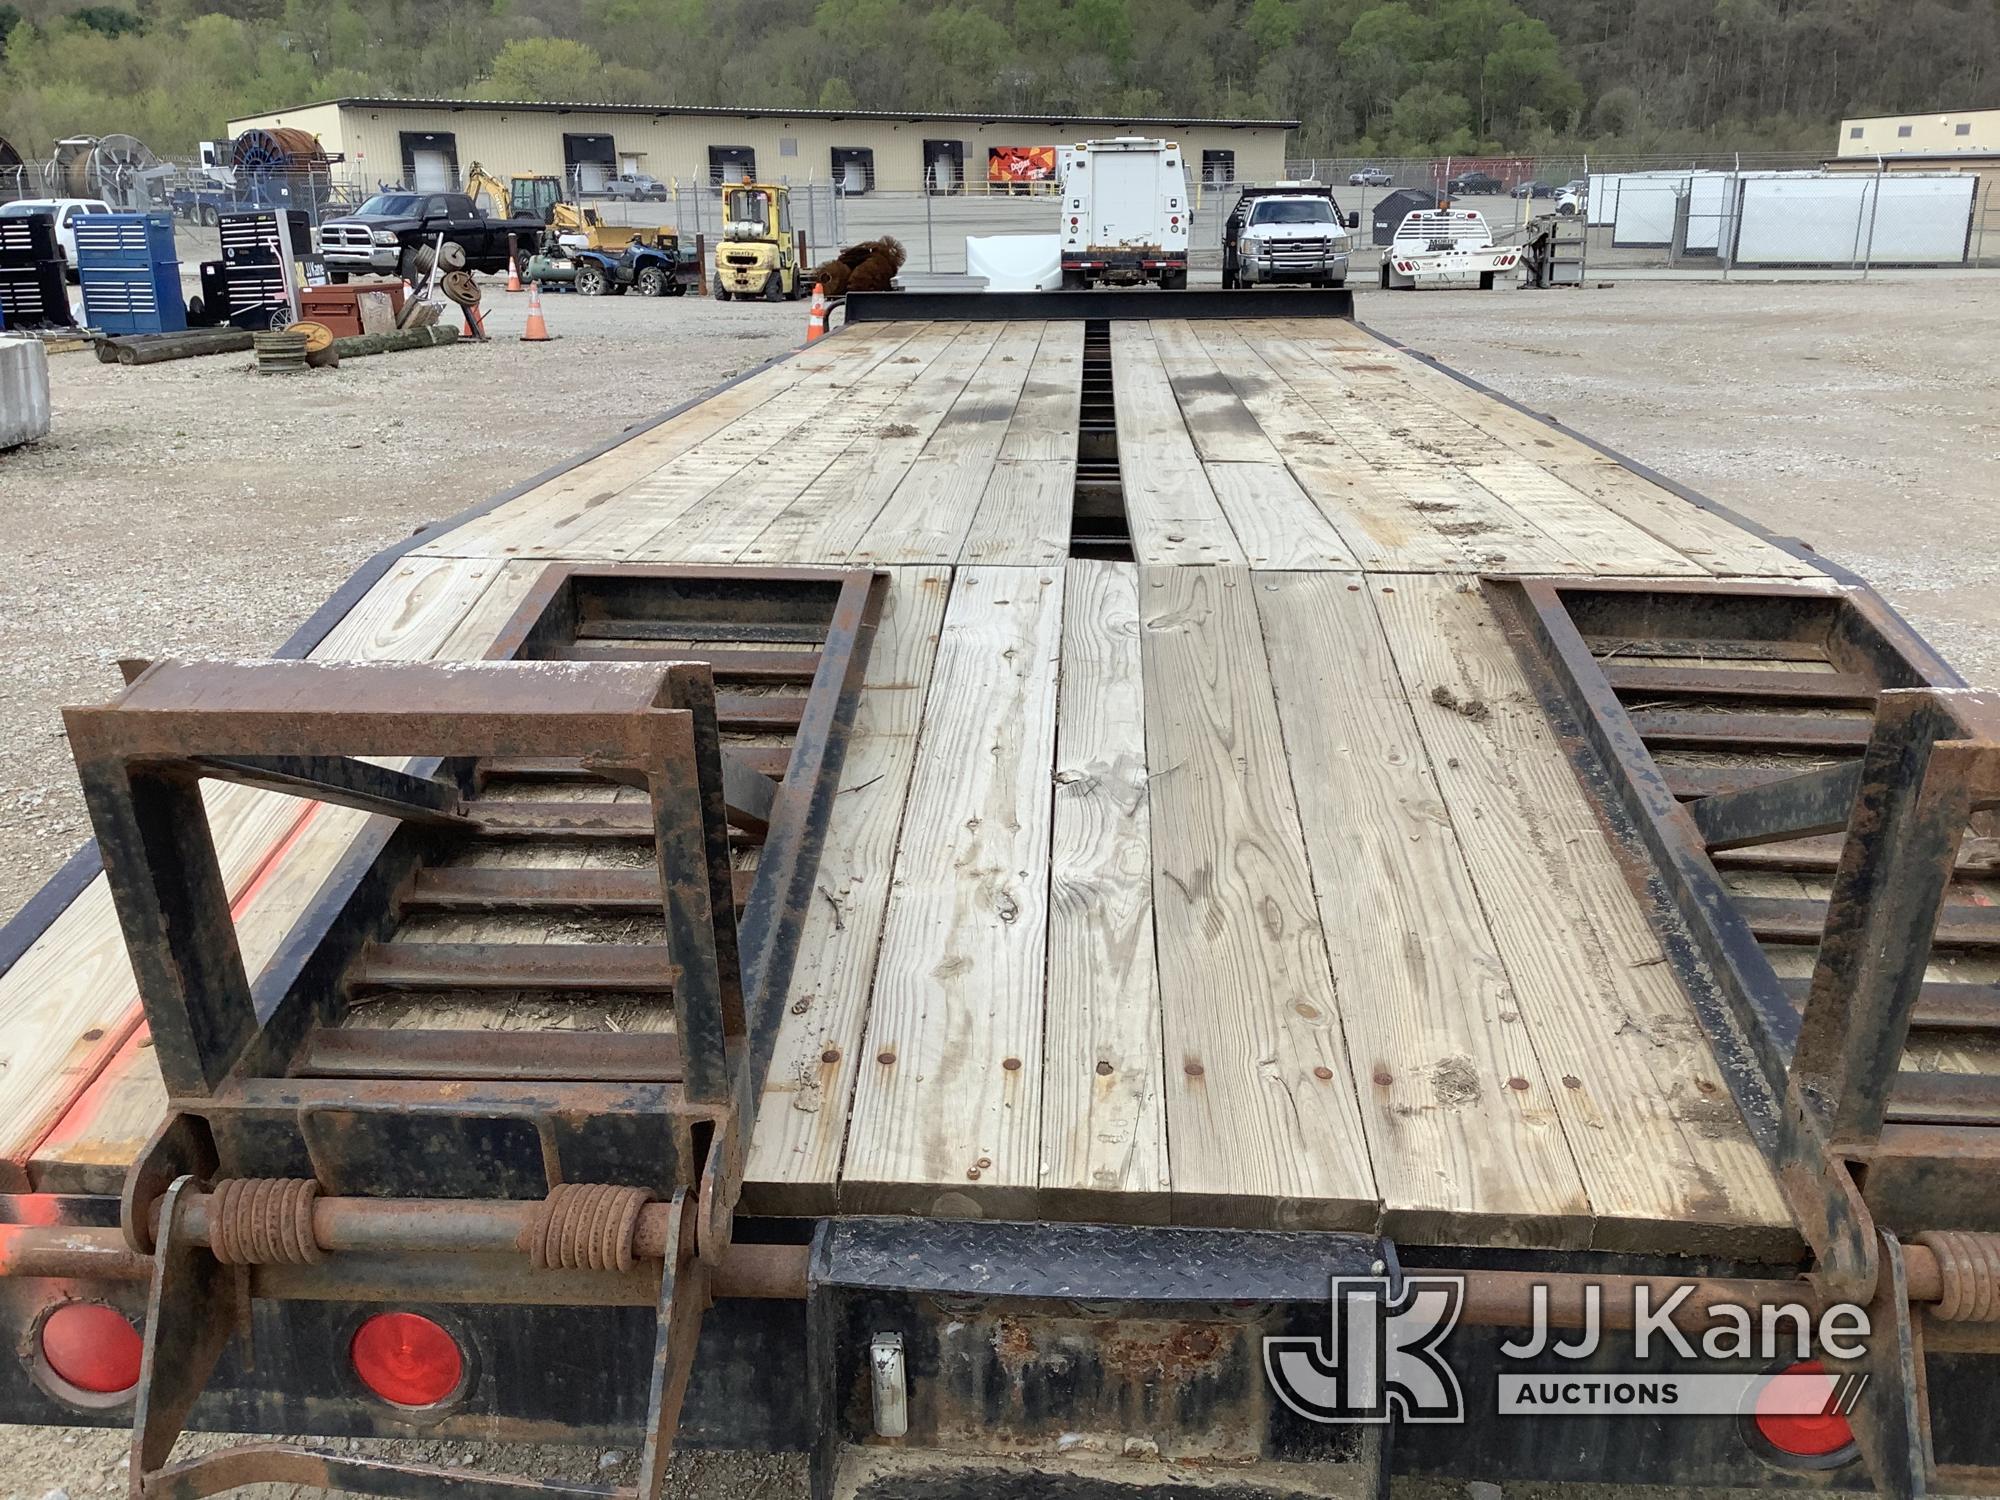 (Smock, PA) 2008 Millennium 0D25PG T/A Tagalong Flatbed Equipment Trailer Rust Damage, Seller States